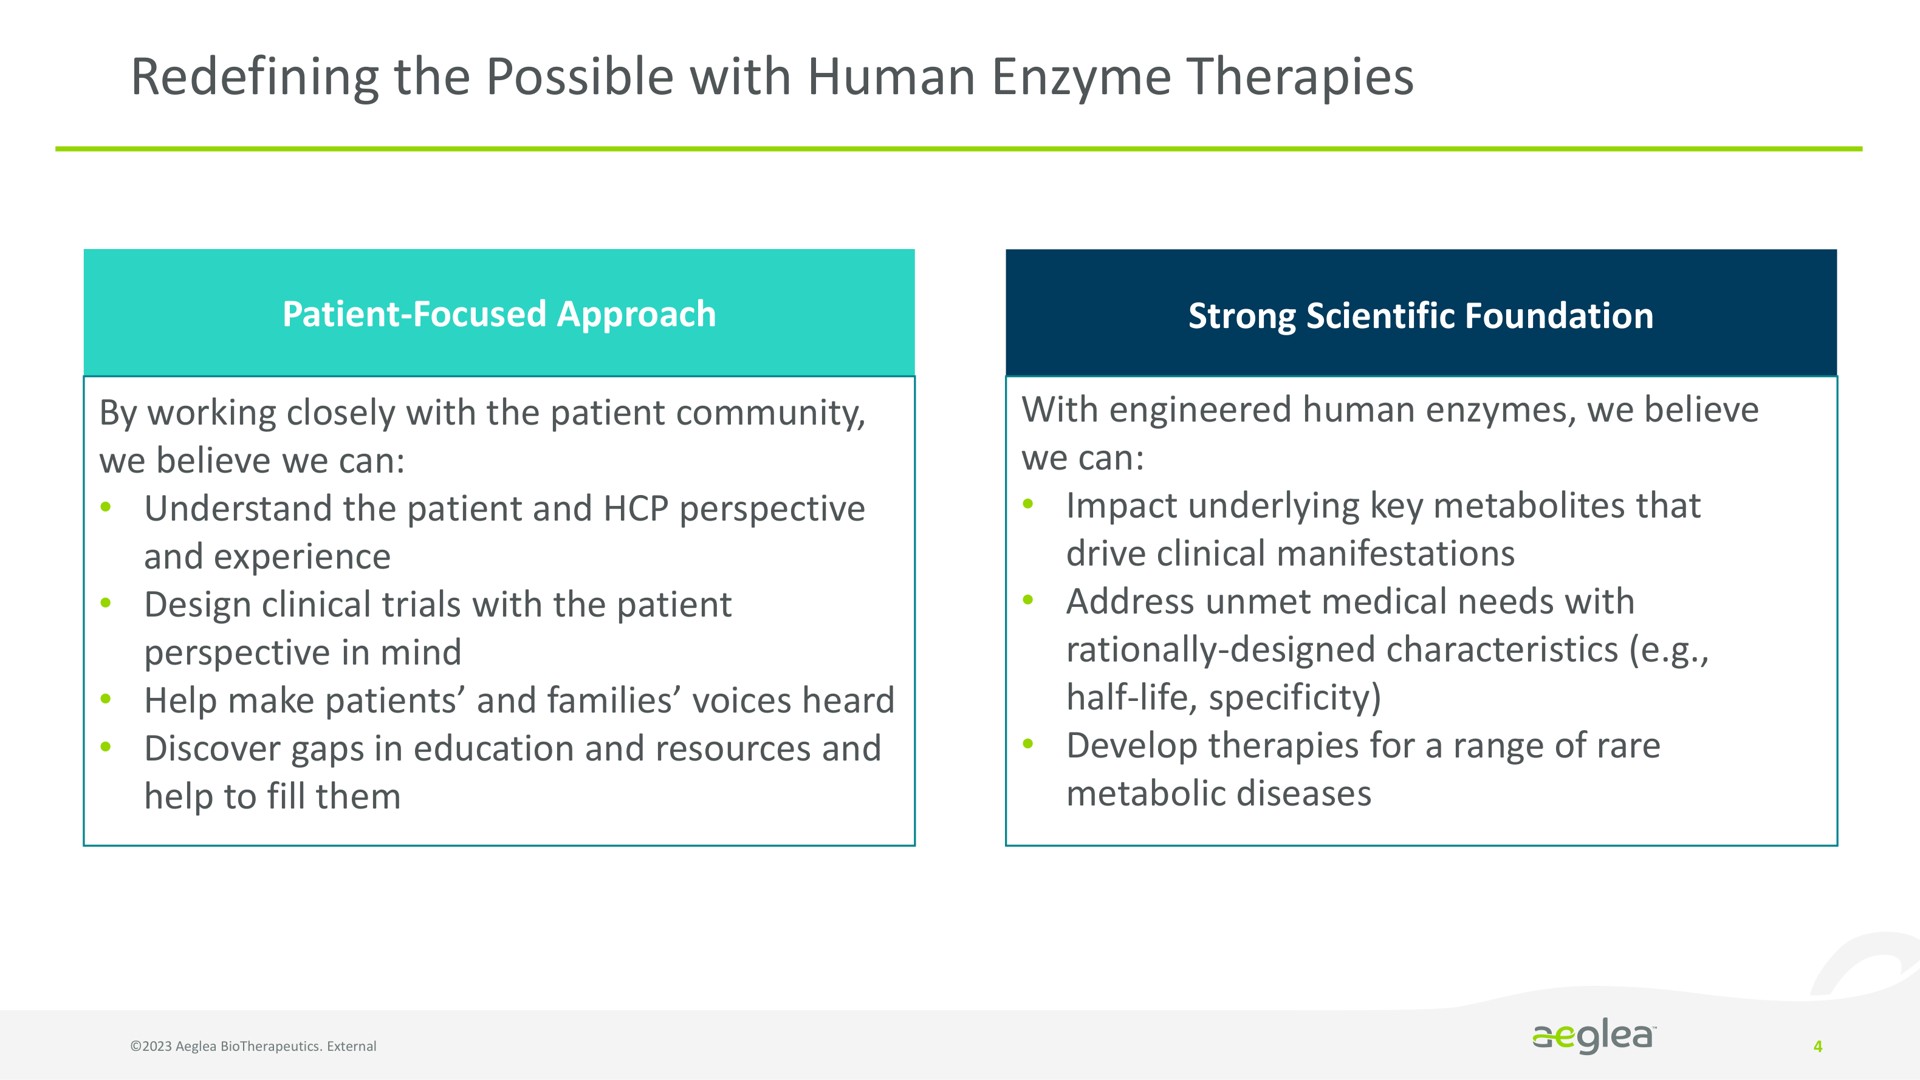 redefining the possible with human enzyme therapies | Aeglea BioTherapeutics